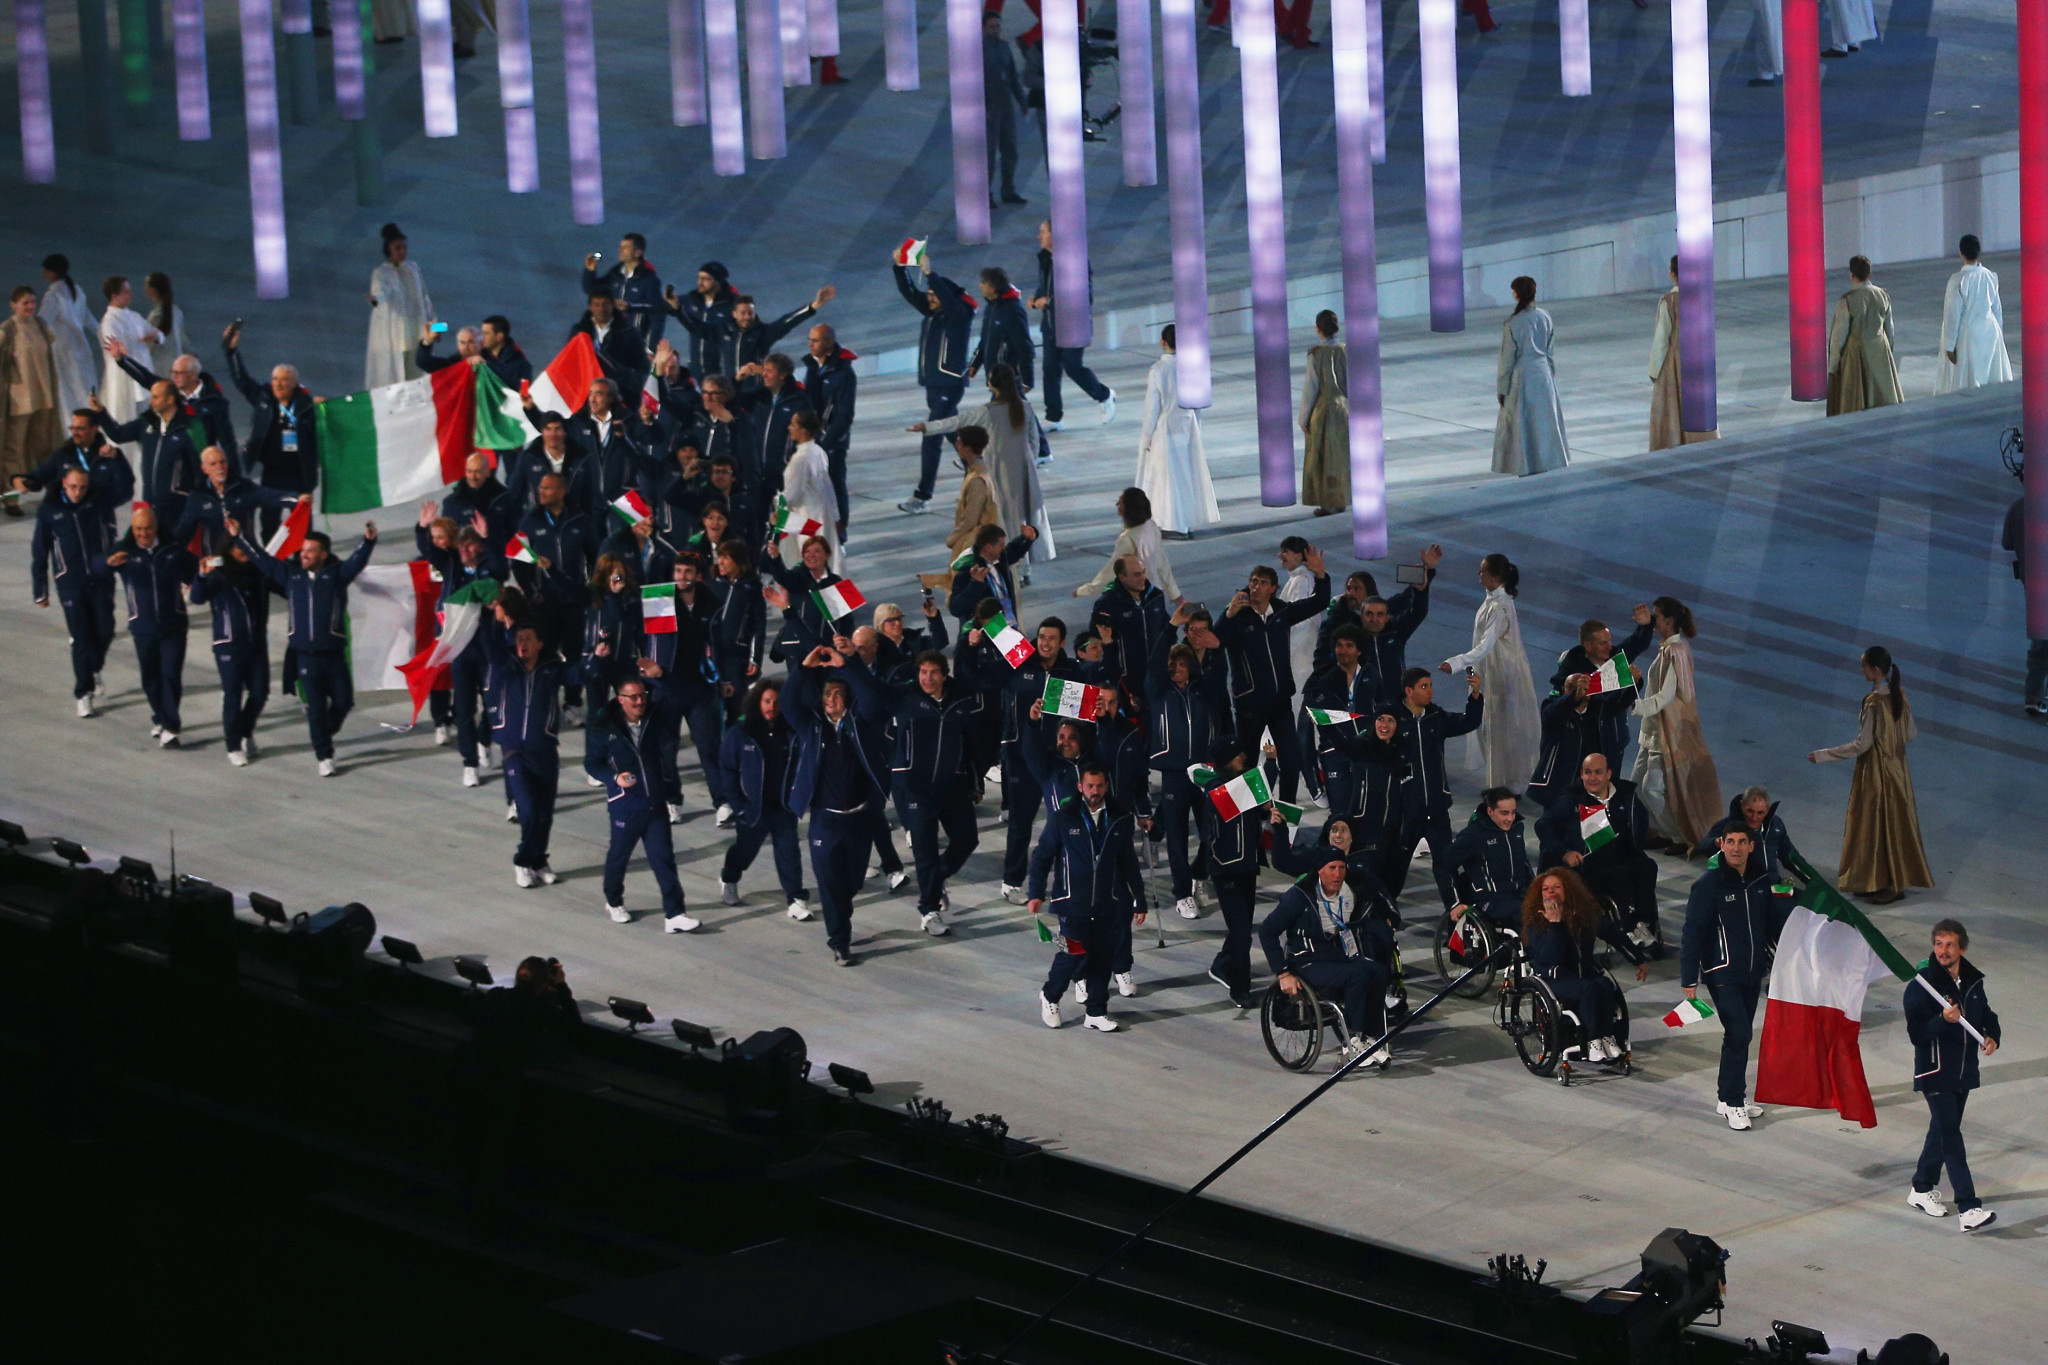 Andrea Chiarotti carried the Italian flag at the Opening Ceremony of the 2014 Paralympics in Sochi ©Getty Images